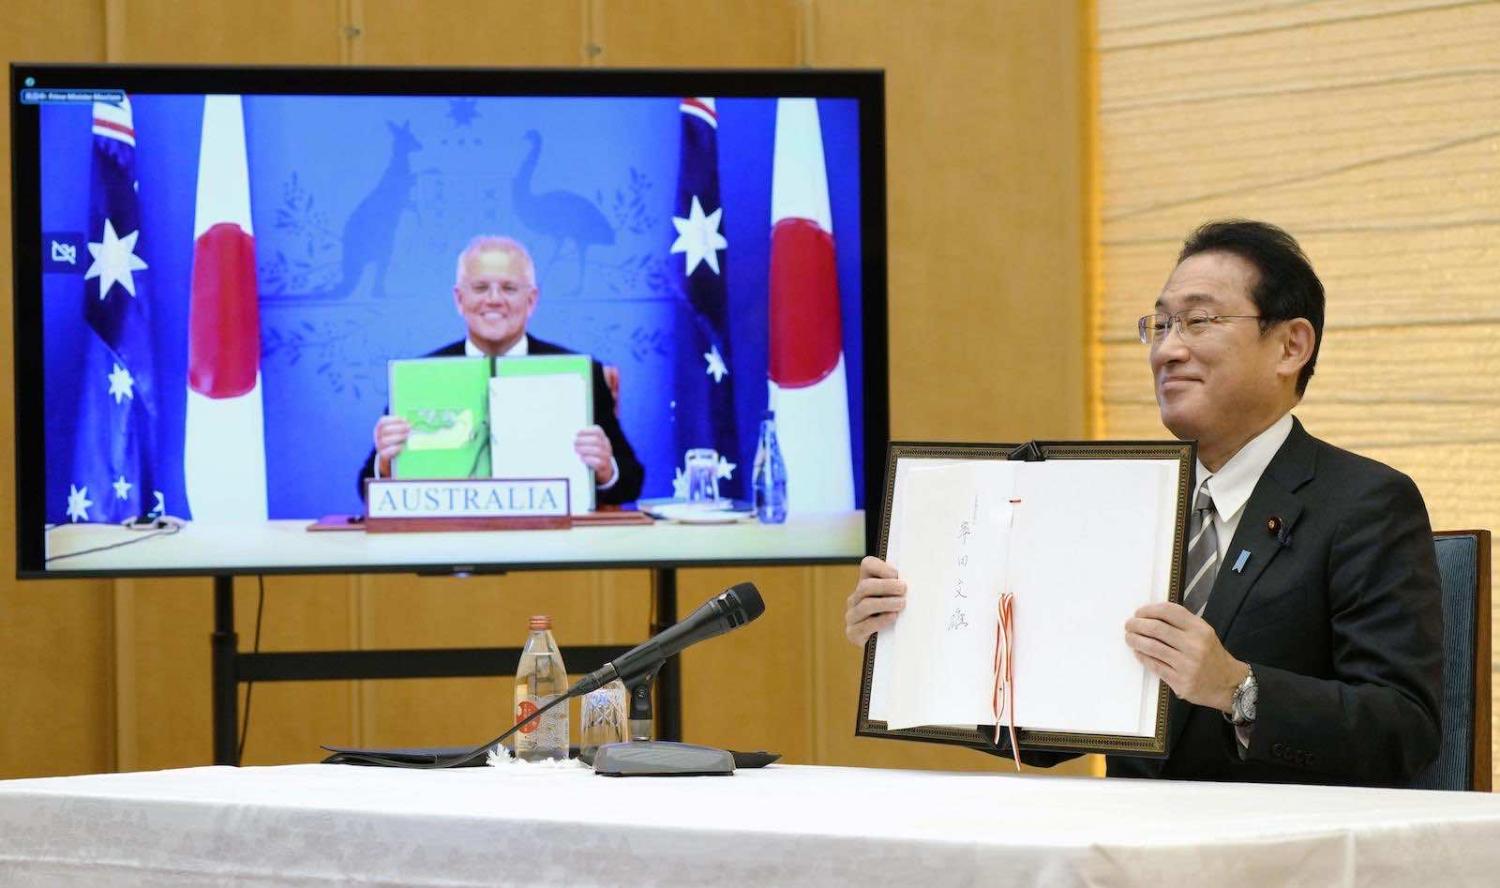 Japan’s Prime Minister Fumio Kishida iafter signing a treaty to facilitate joint exercises between Japan and Australia in a virtual meeting Prime Minister Scott Morrison (Kyodo News via Getty Images)